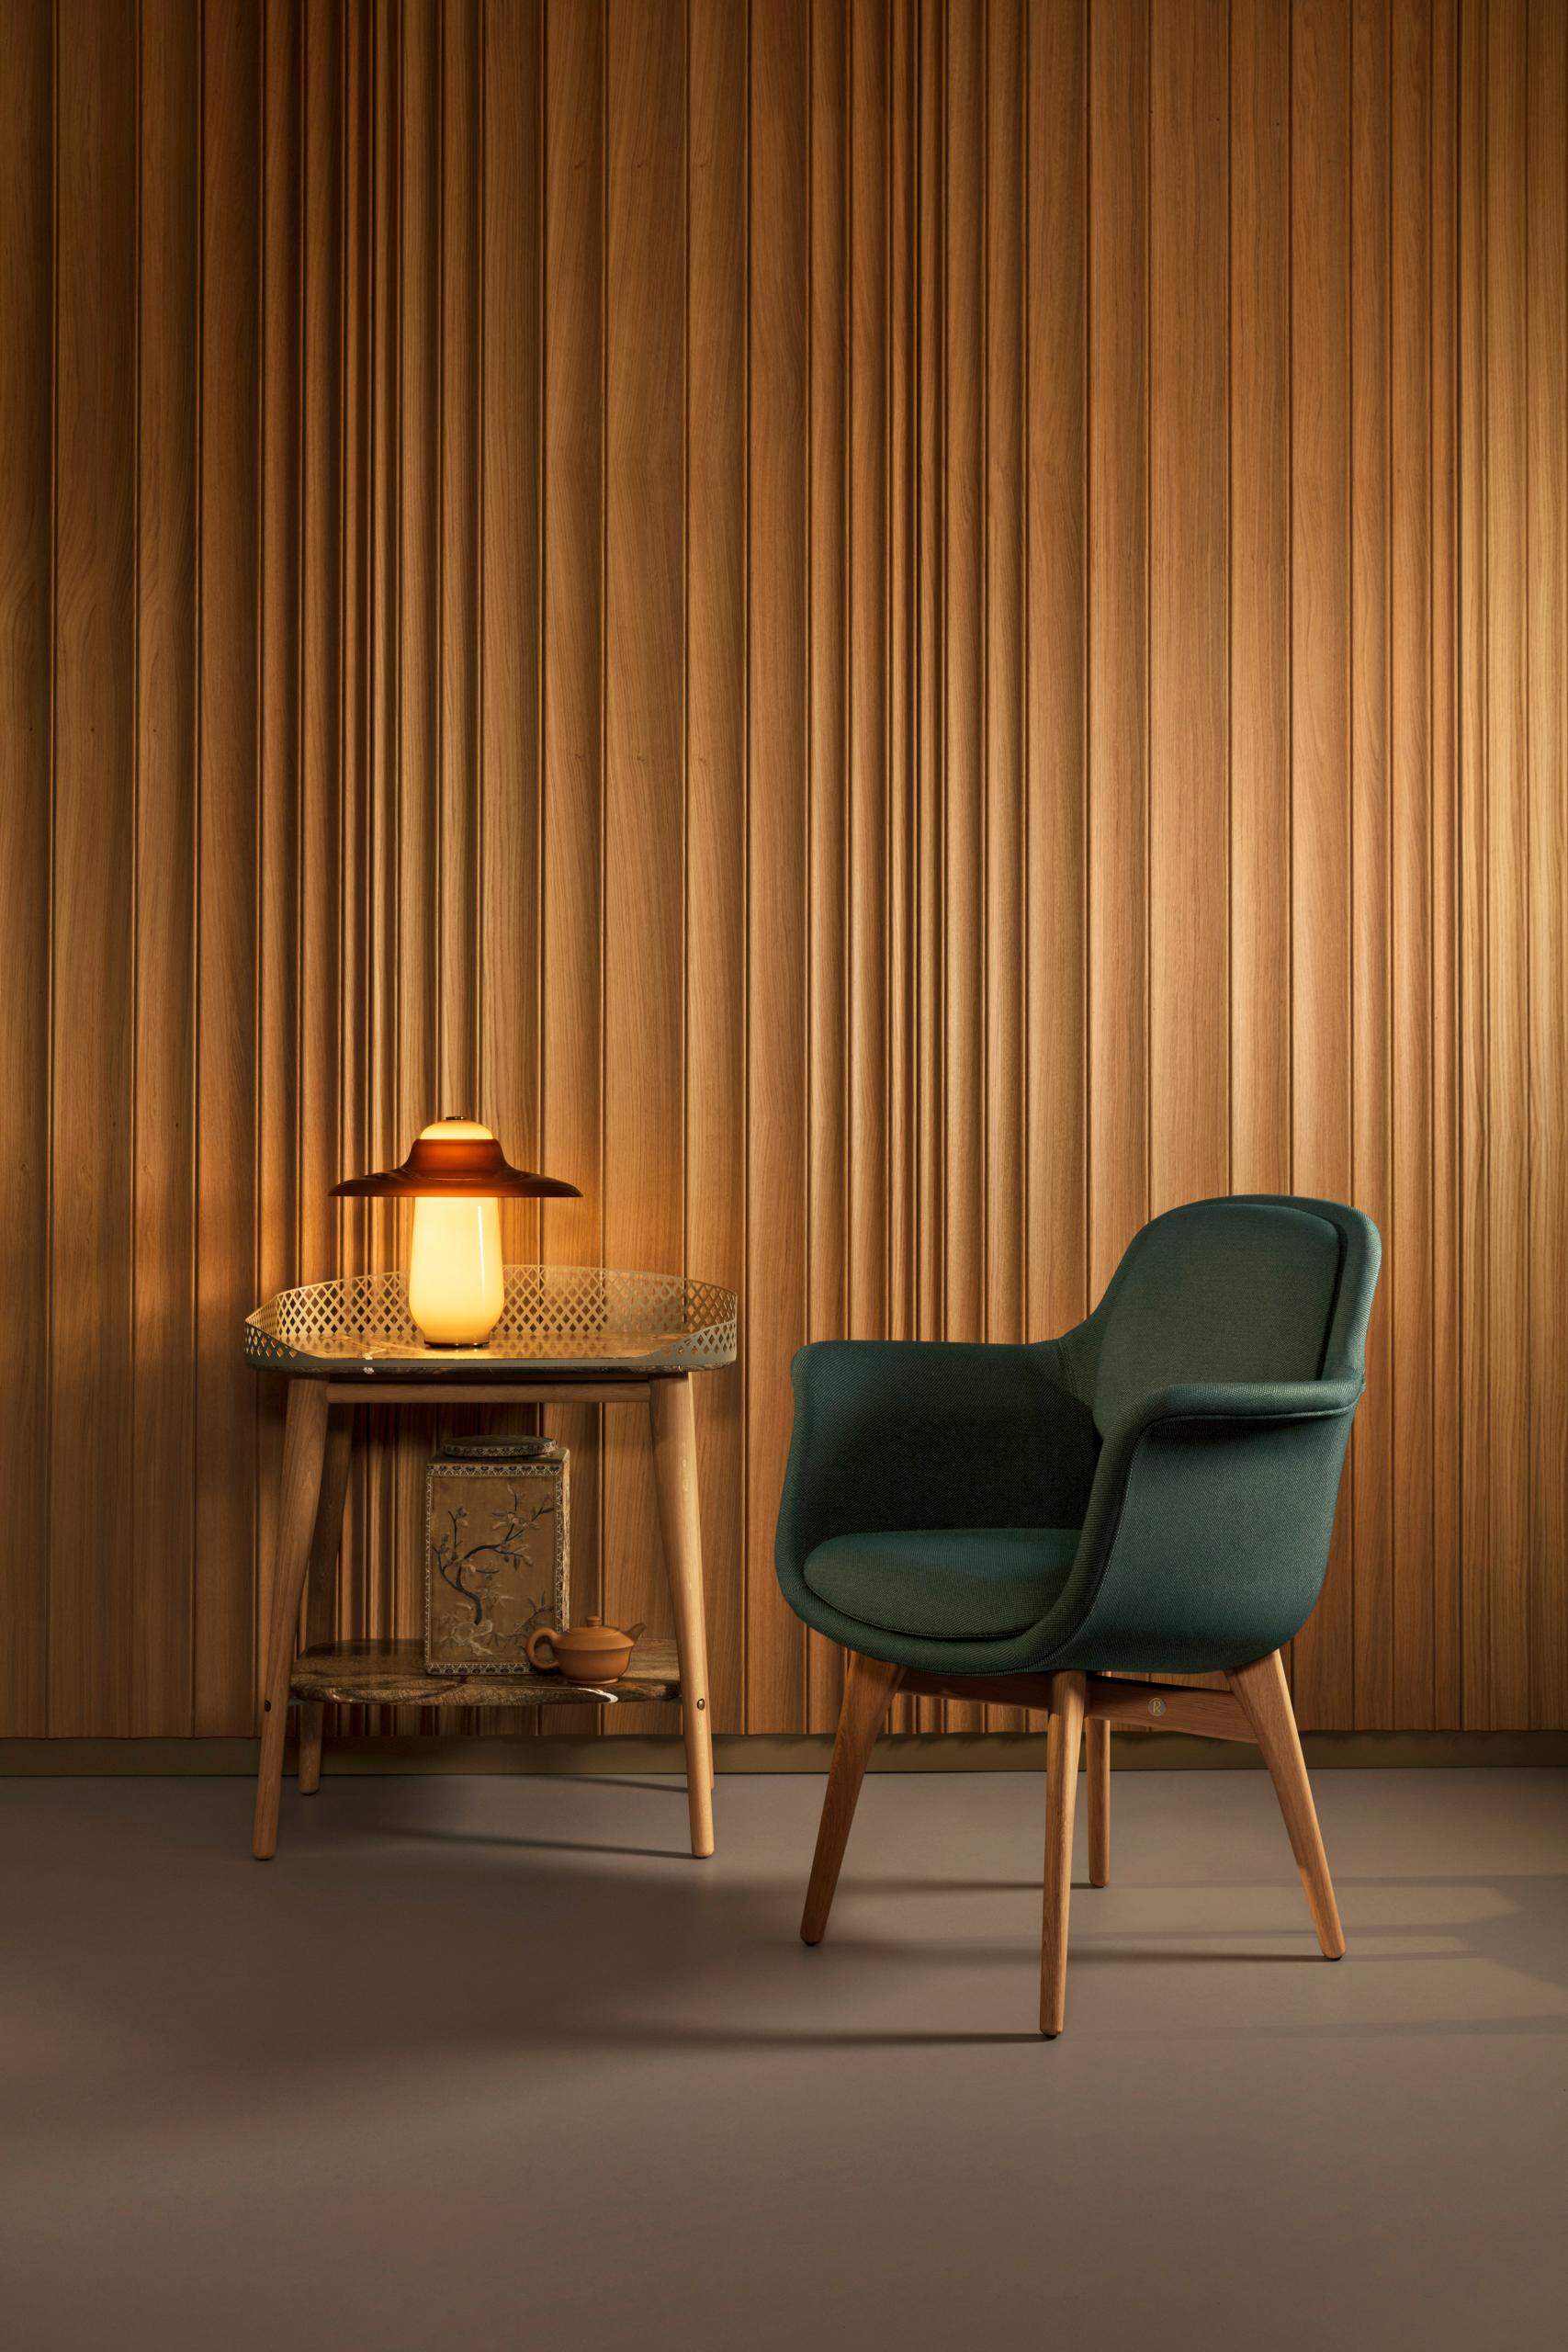 Revised Ovington Table
The Ovington Table Lamp is a stylish complement to any interior. Ovington Table Lamp exudes an inviting radiance and warmth whether it`s illuminated or switched off. The Ovington table lamp is crafted in Italian glass for the